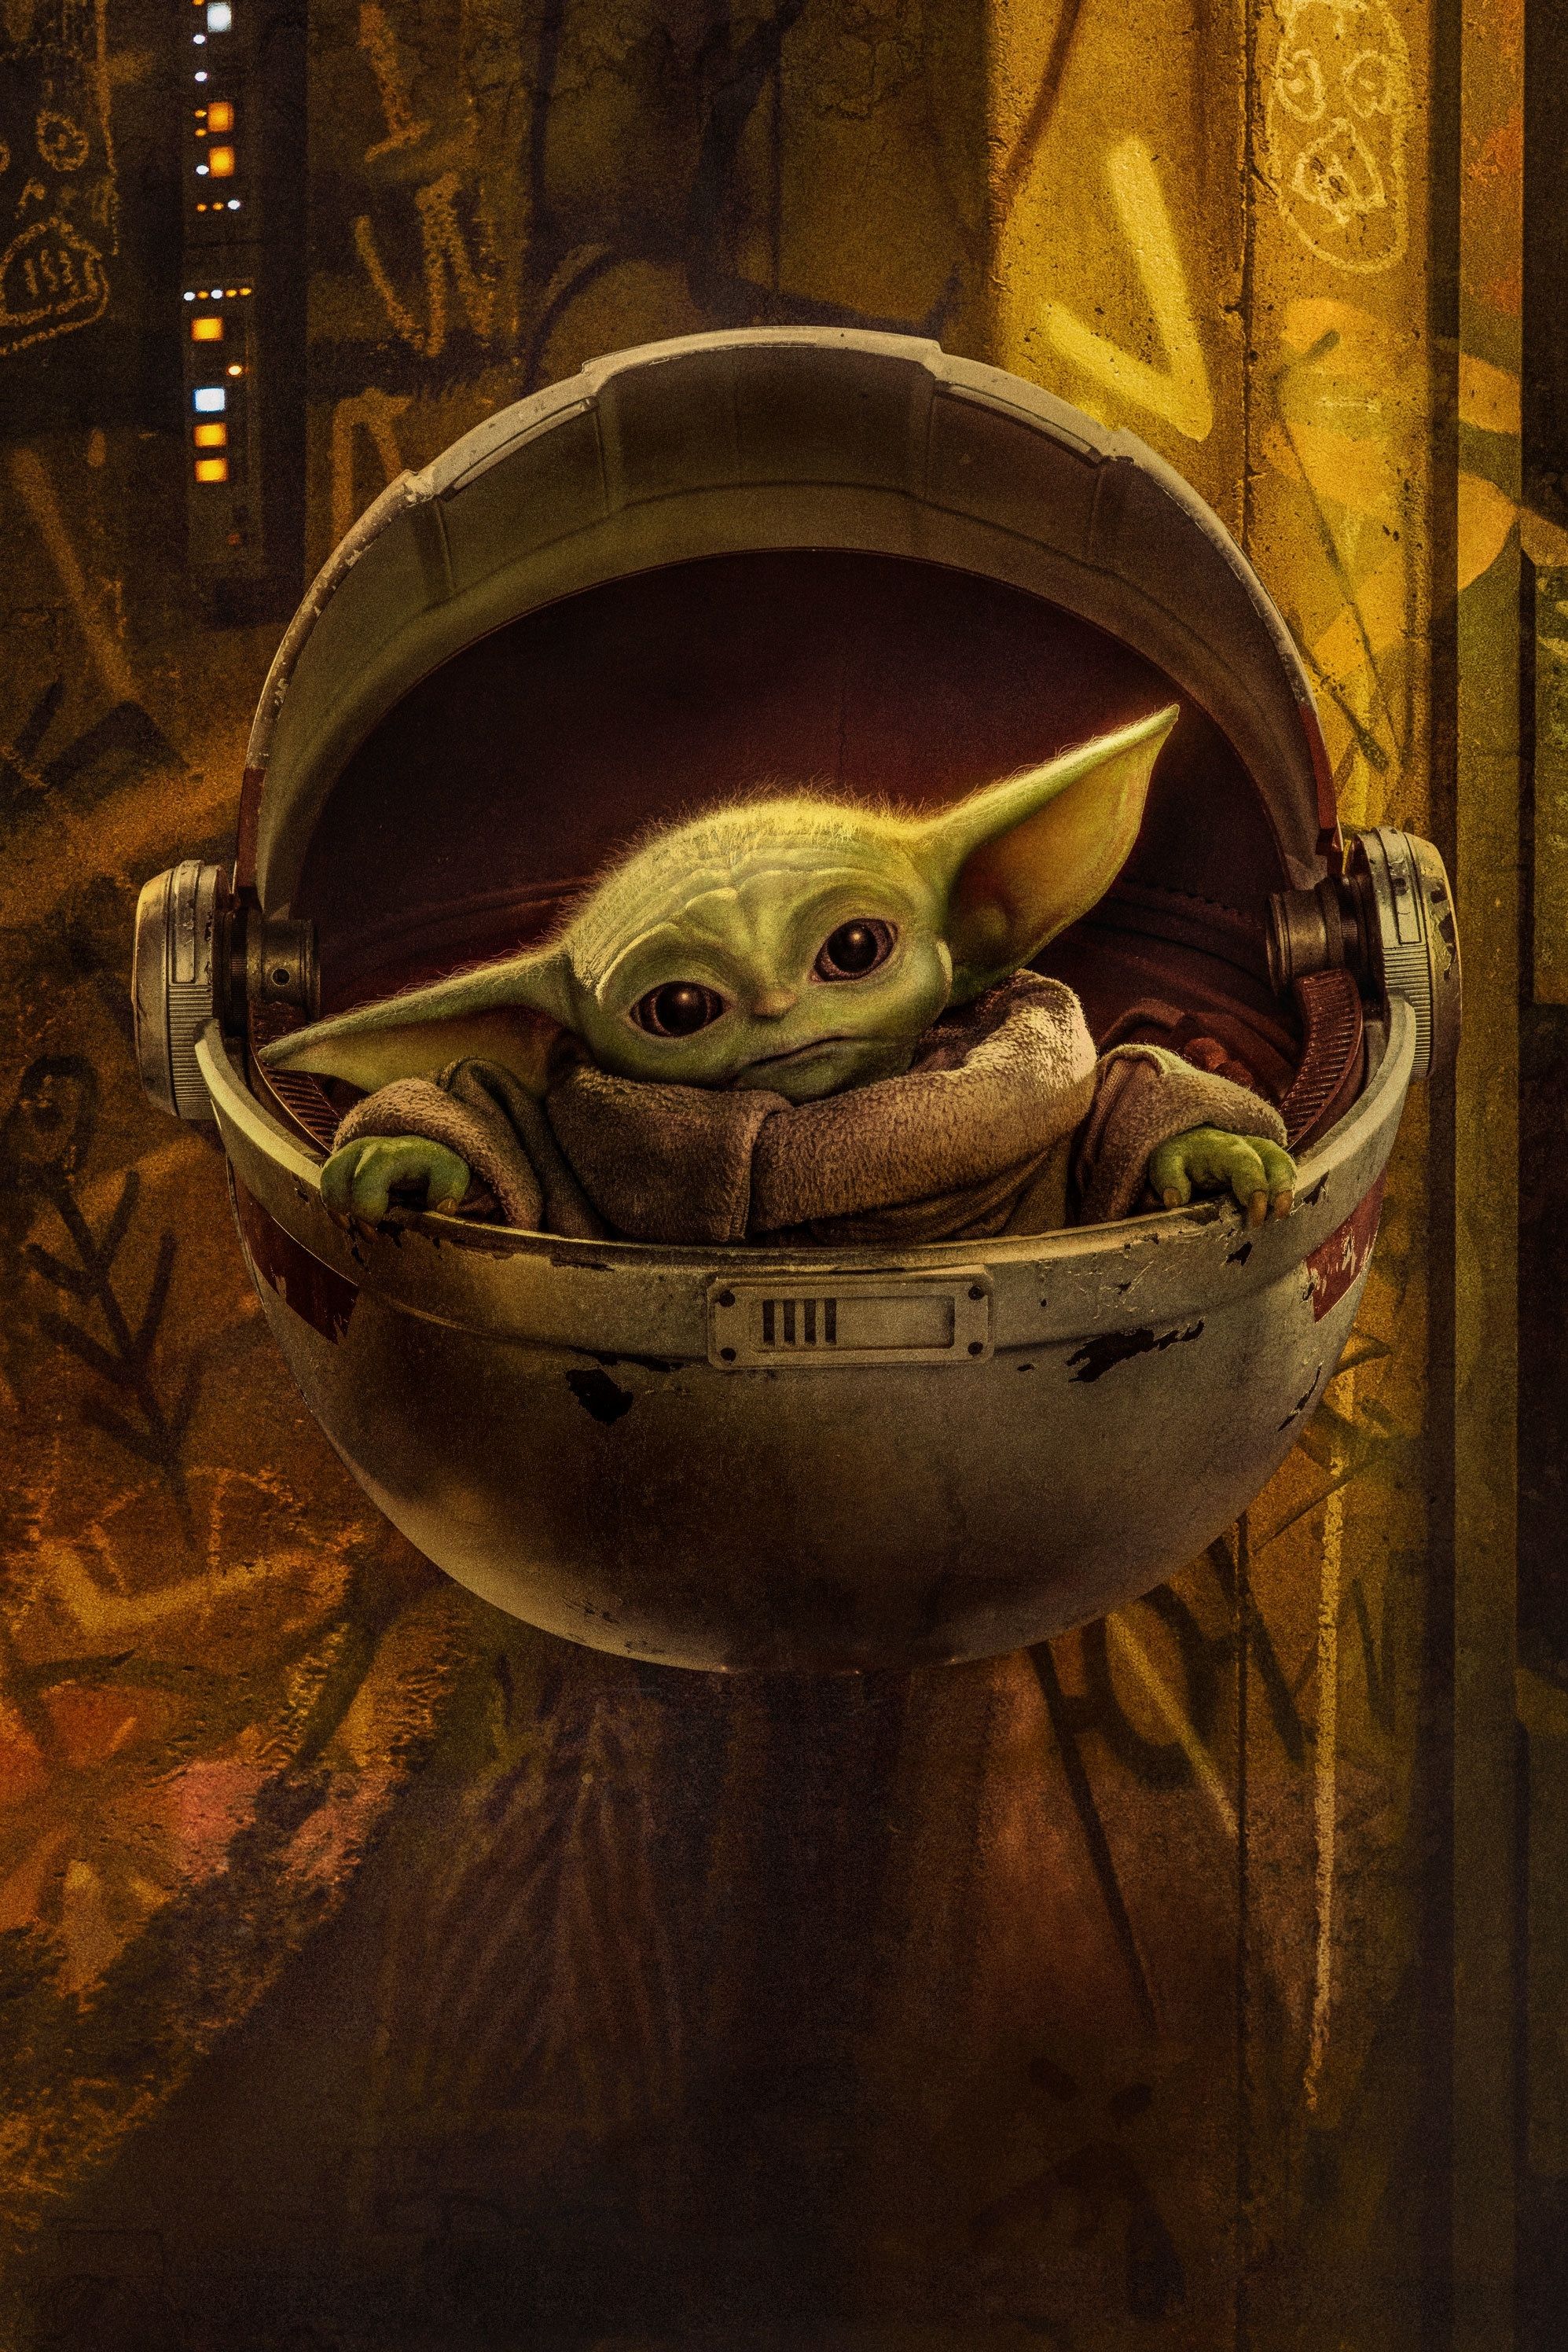 Baby Yoda Poster Wallpaper, HD TV Series 4K Wallpaper, Image, Photo and Background